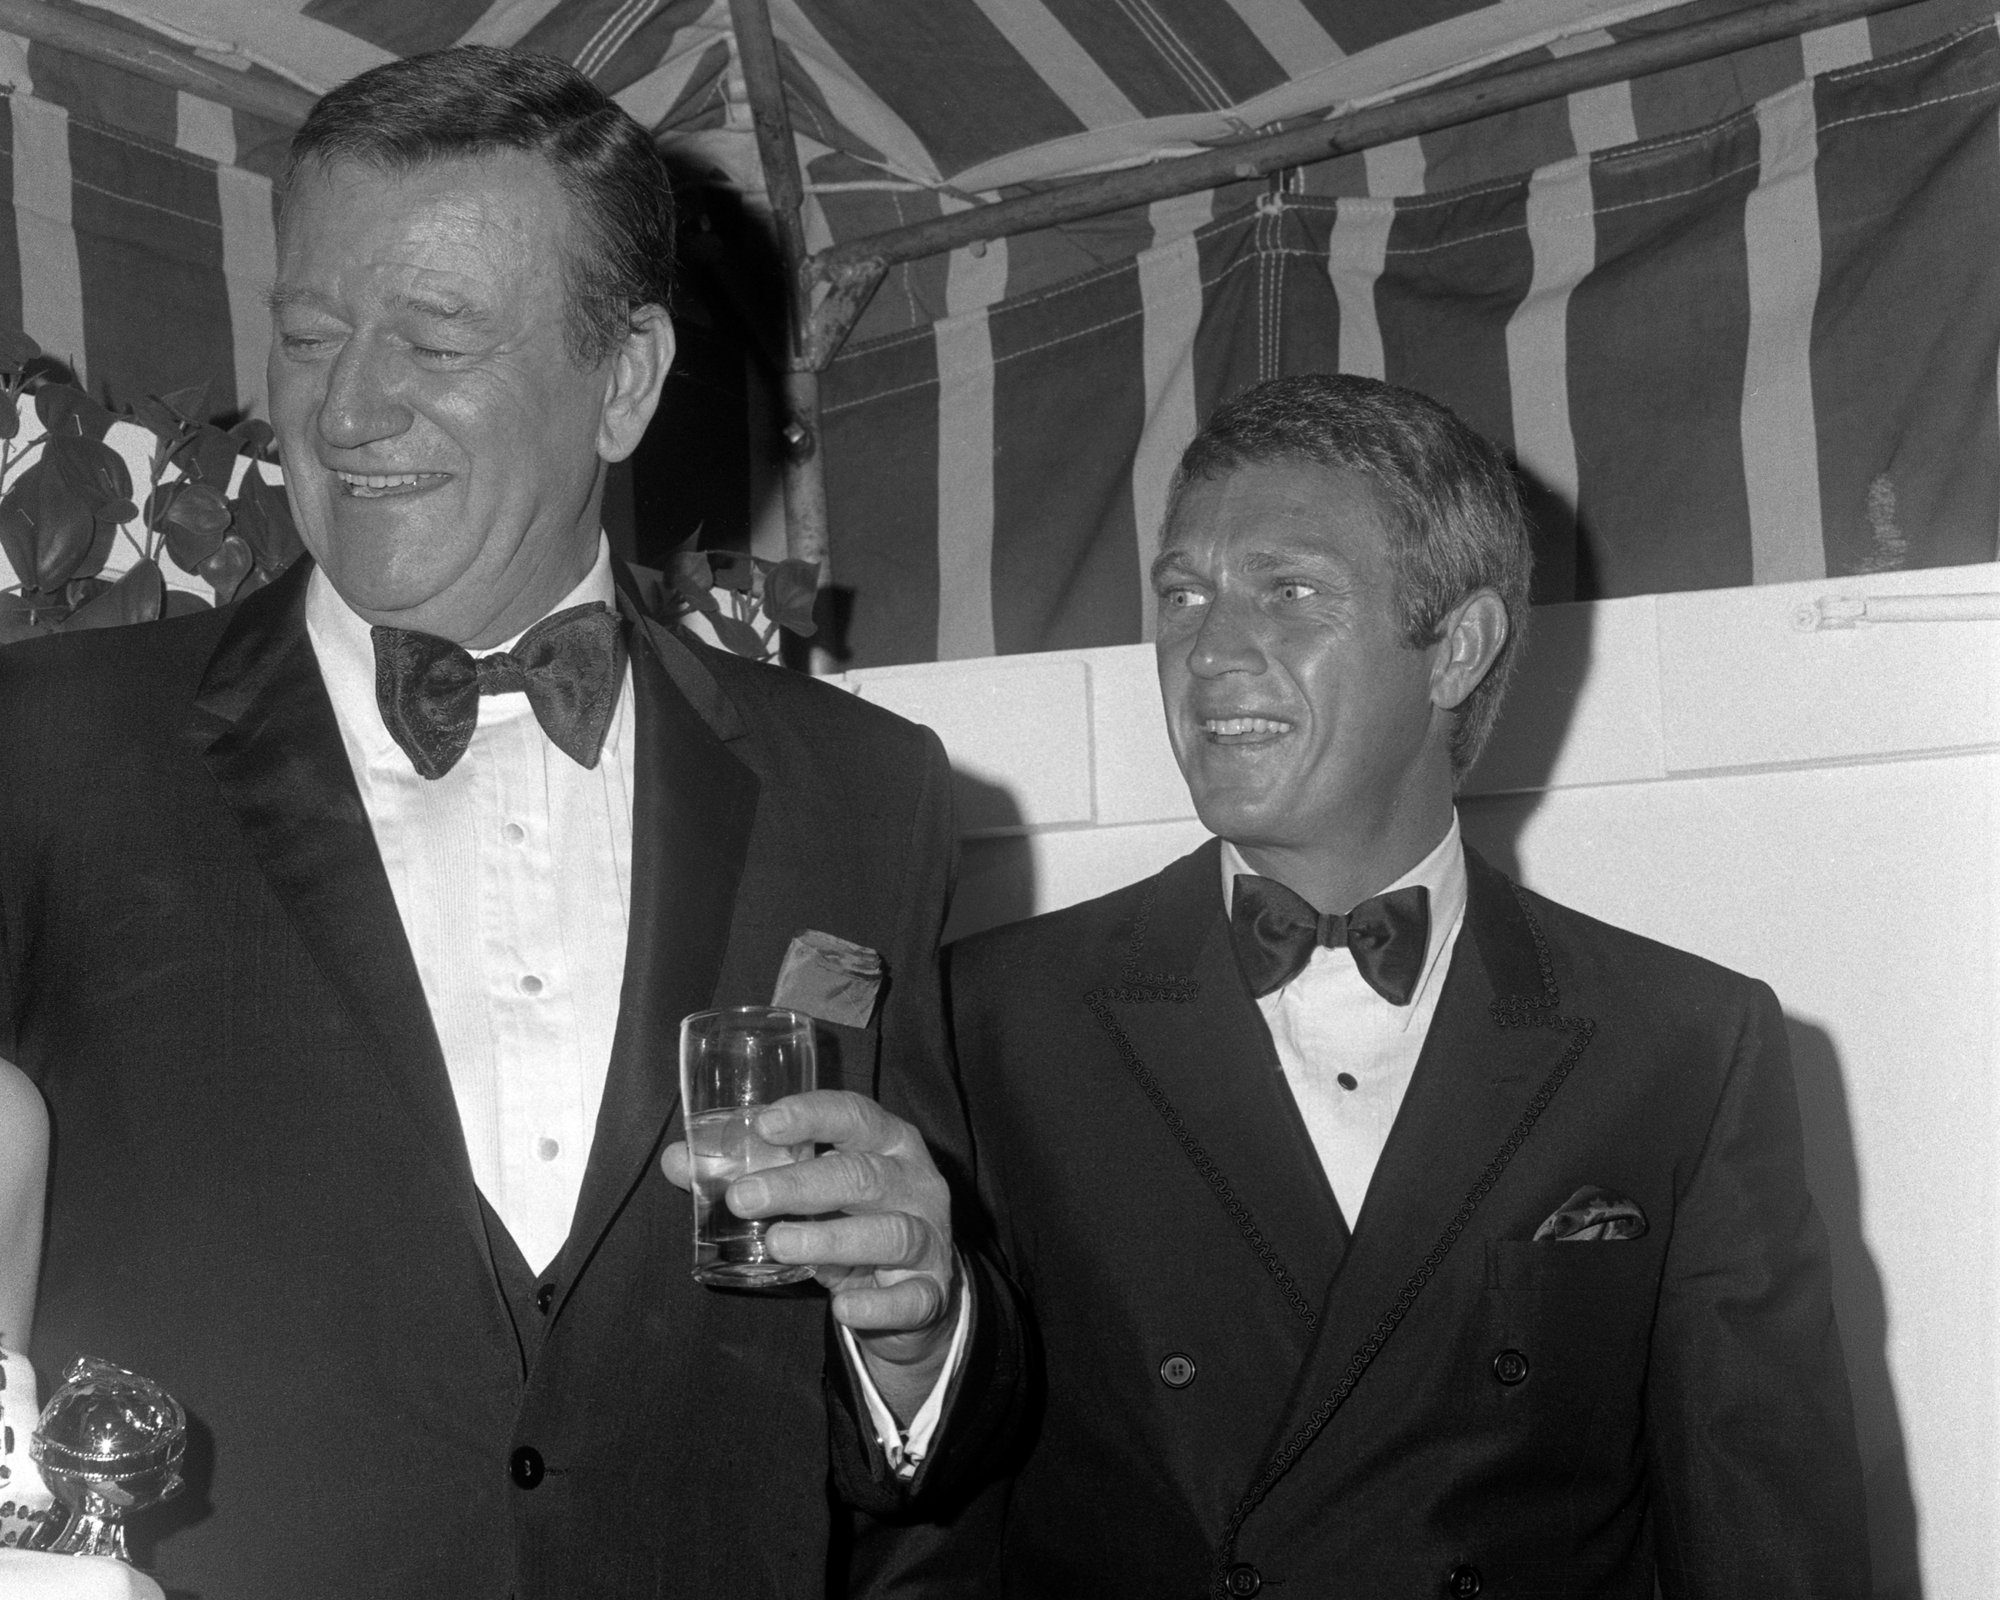 John Wayne and Steve McQueen at Golden Globes wearing tuxedos and smiling